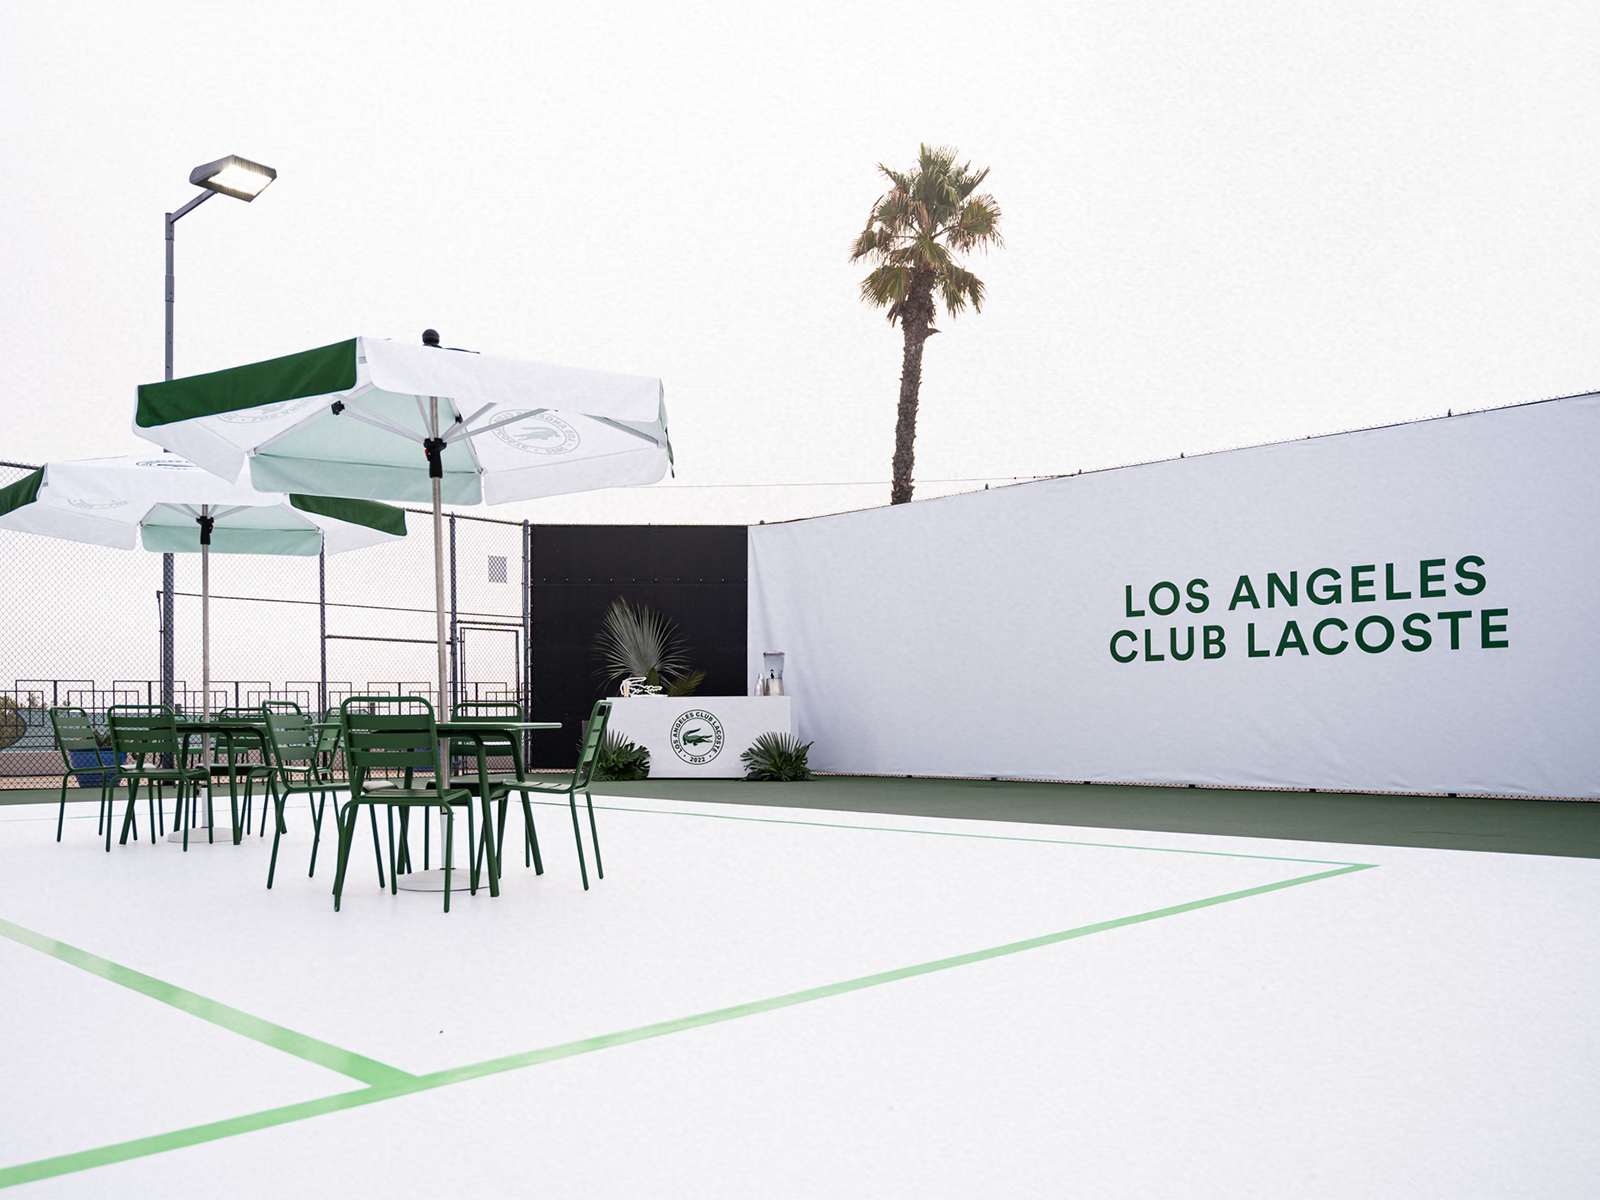 Find out all about Los Angeles Club Lacoste